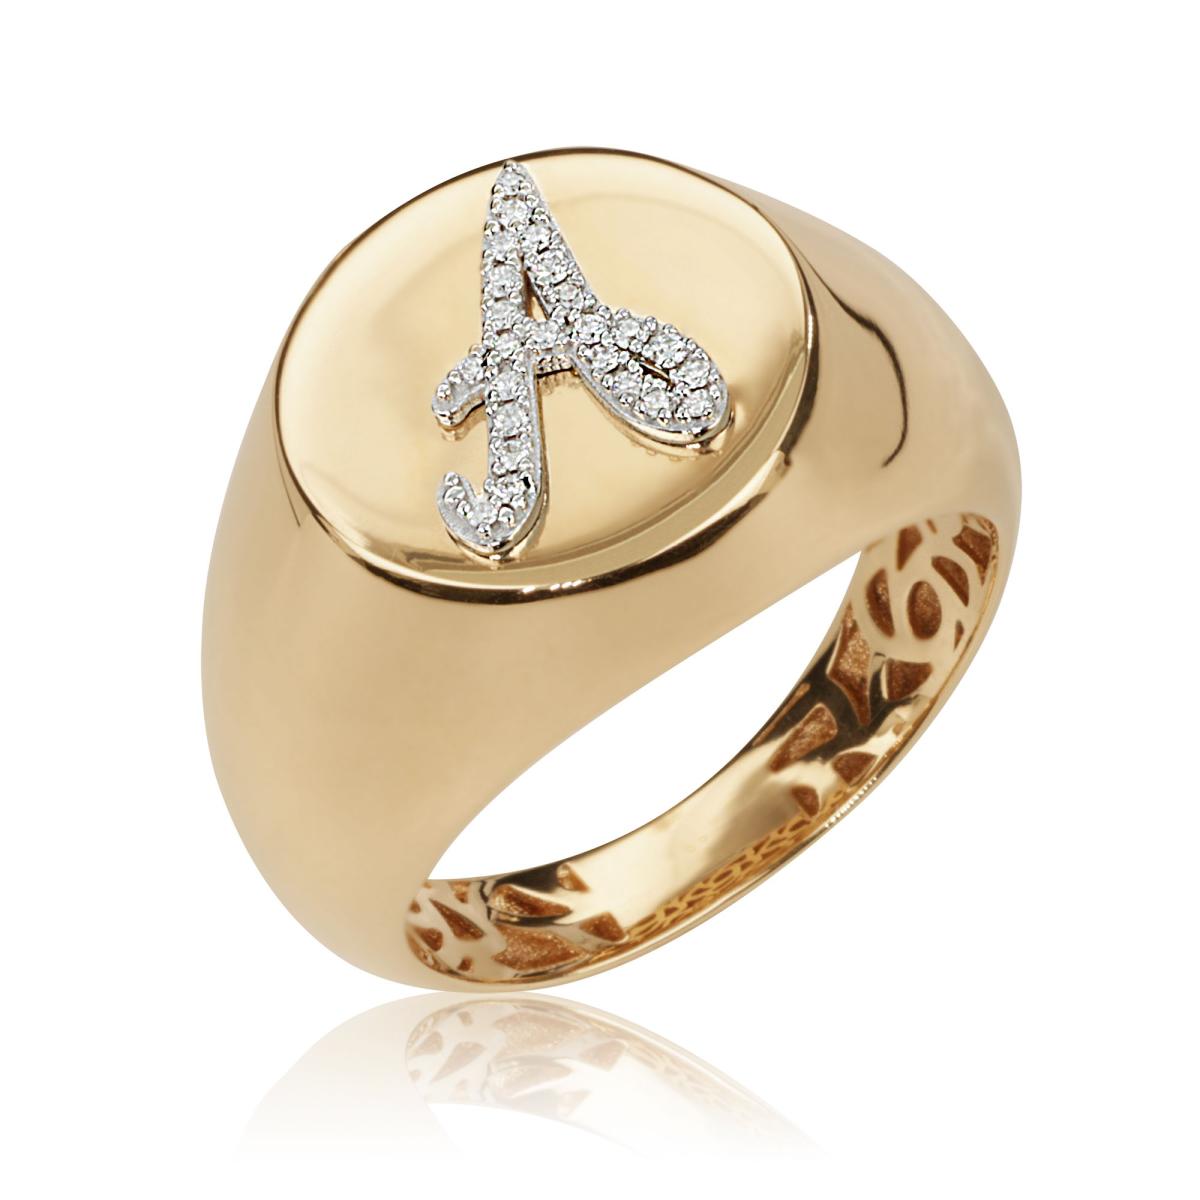 Chevalier ring in 18 kt gold, with customizable initial in diamonds - AD893